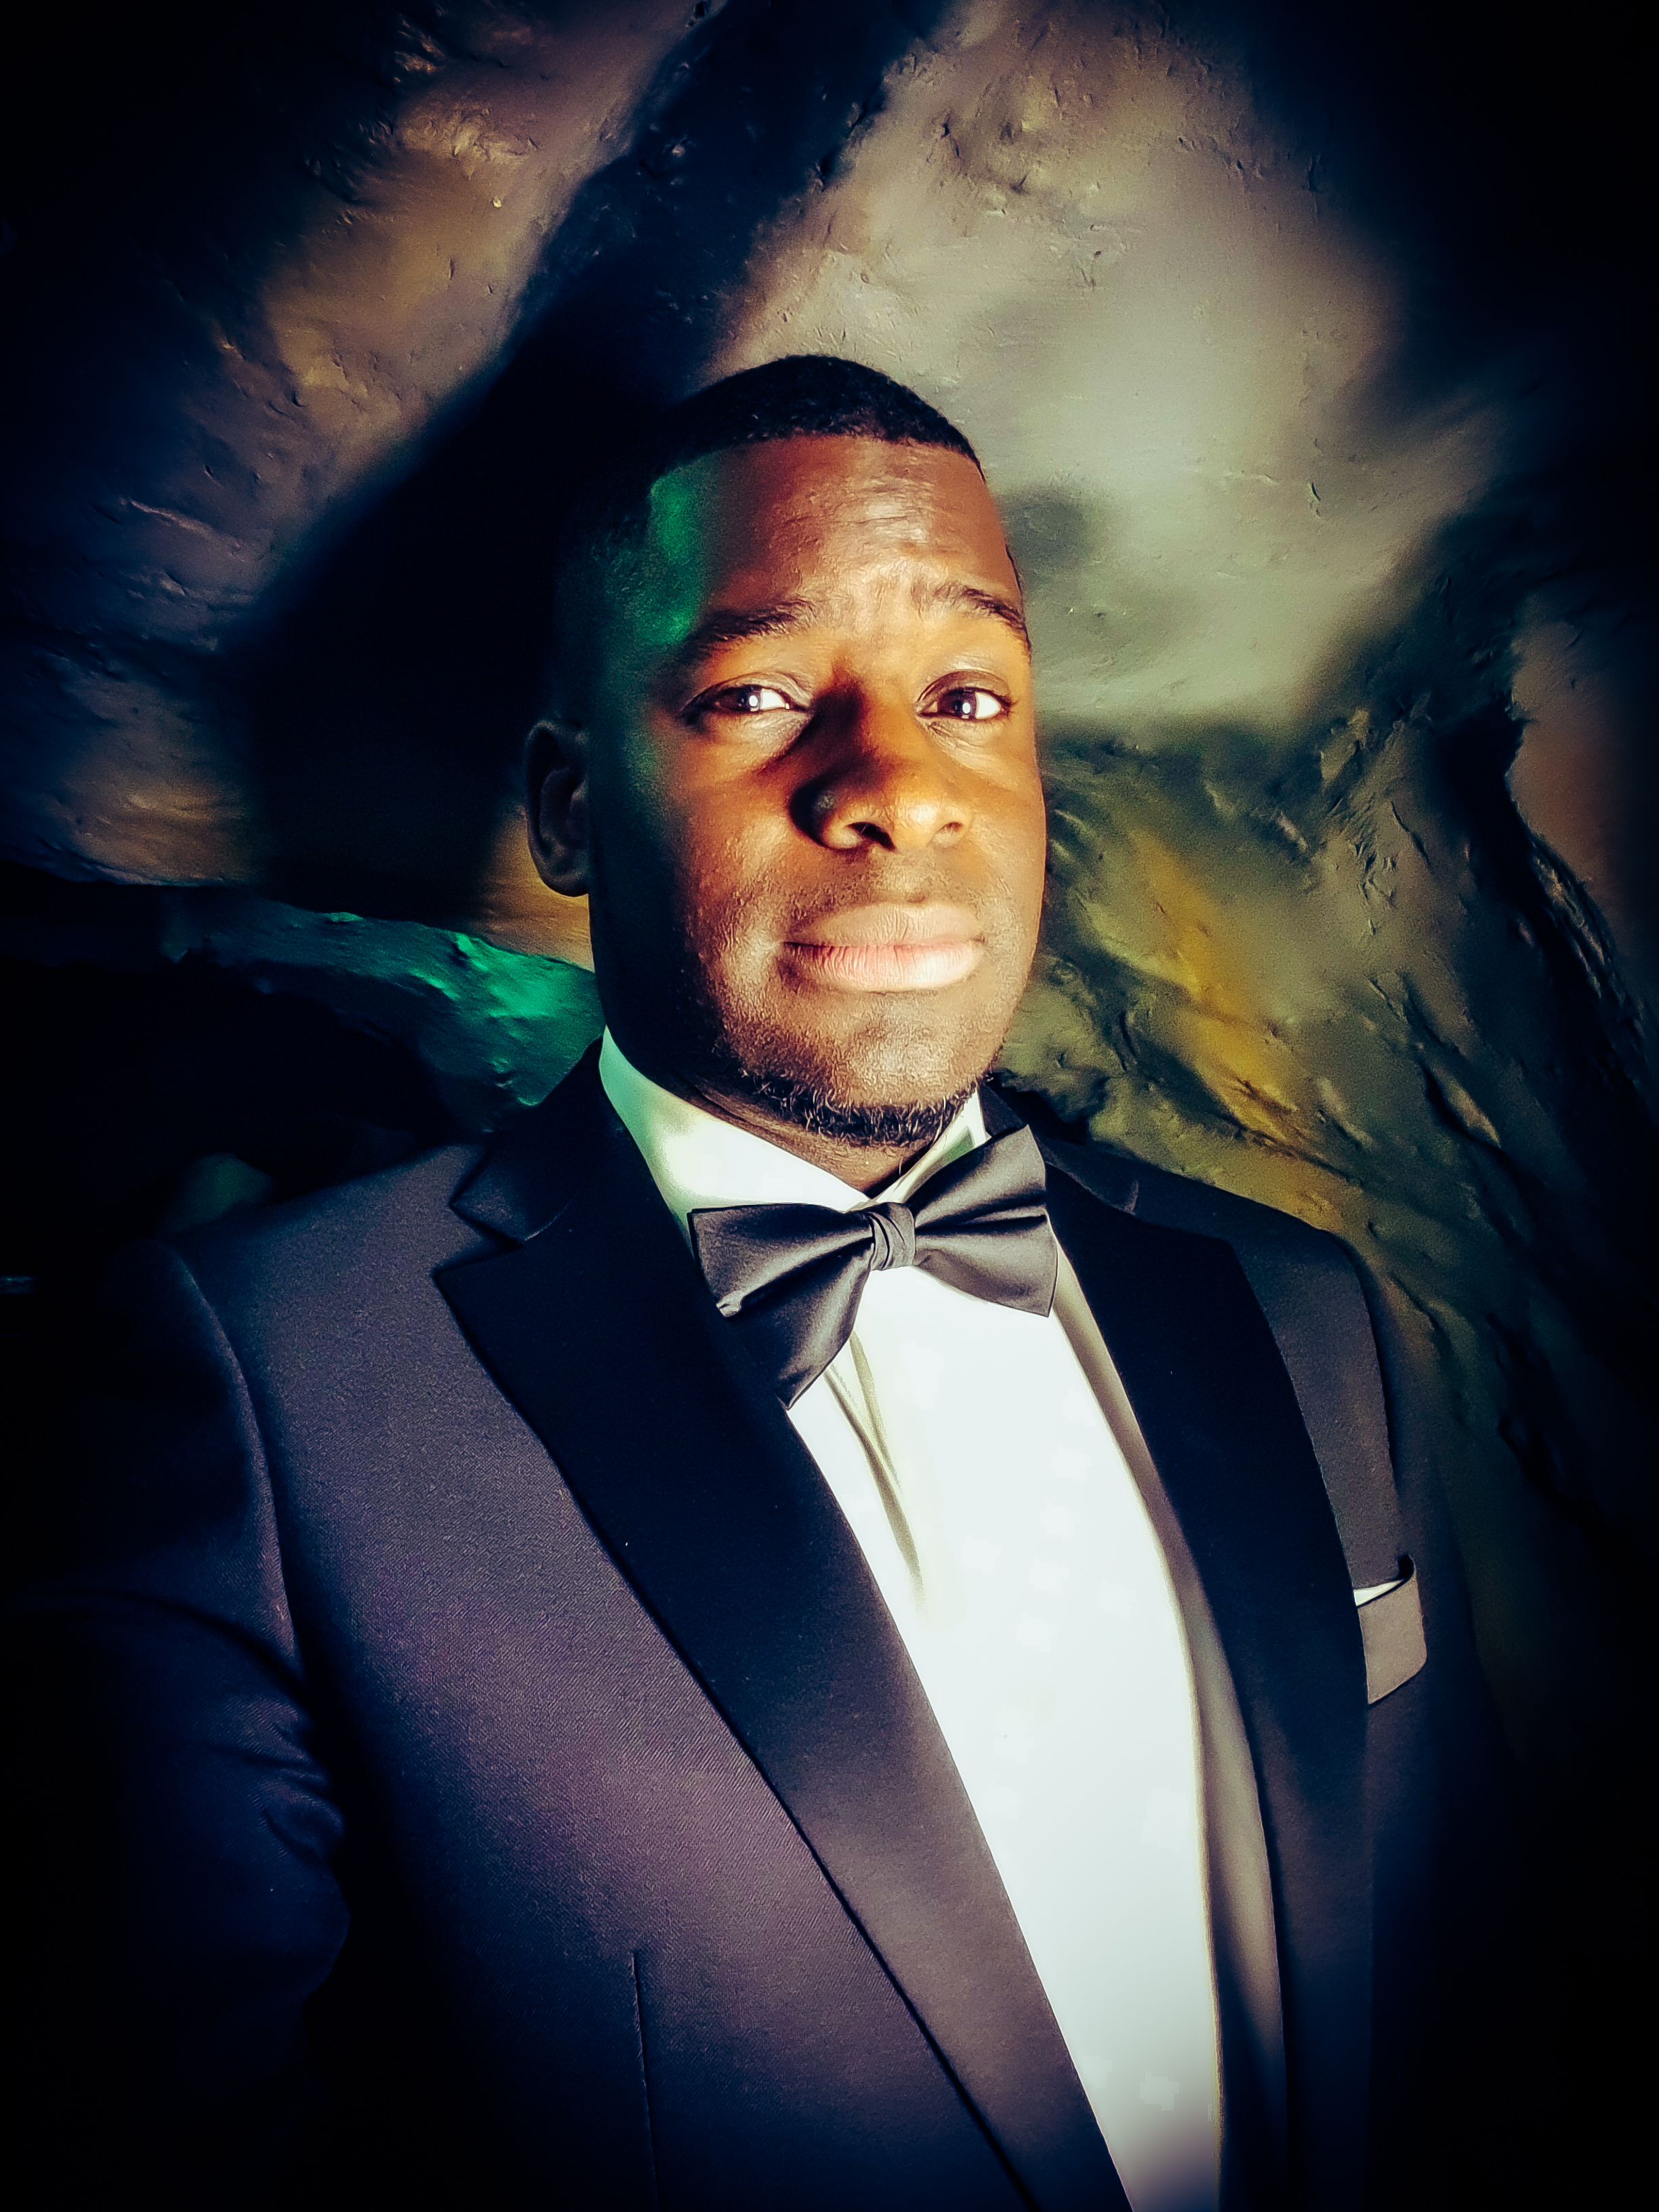 Inel joins the Official Bafta Games Awards Host Team - Inel Tomlinson